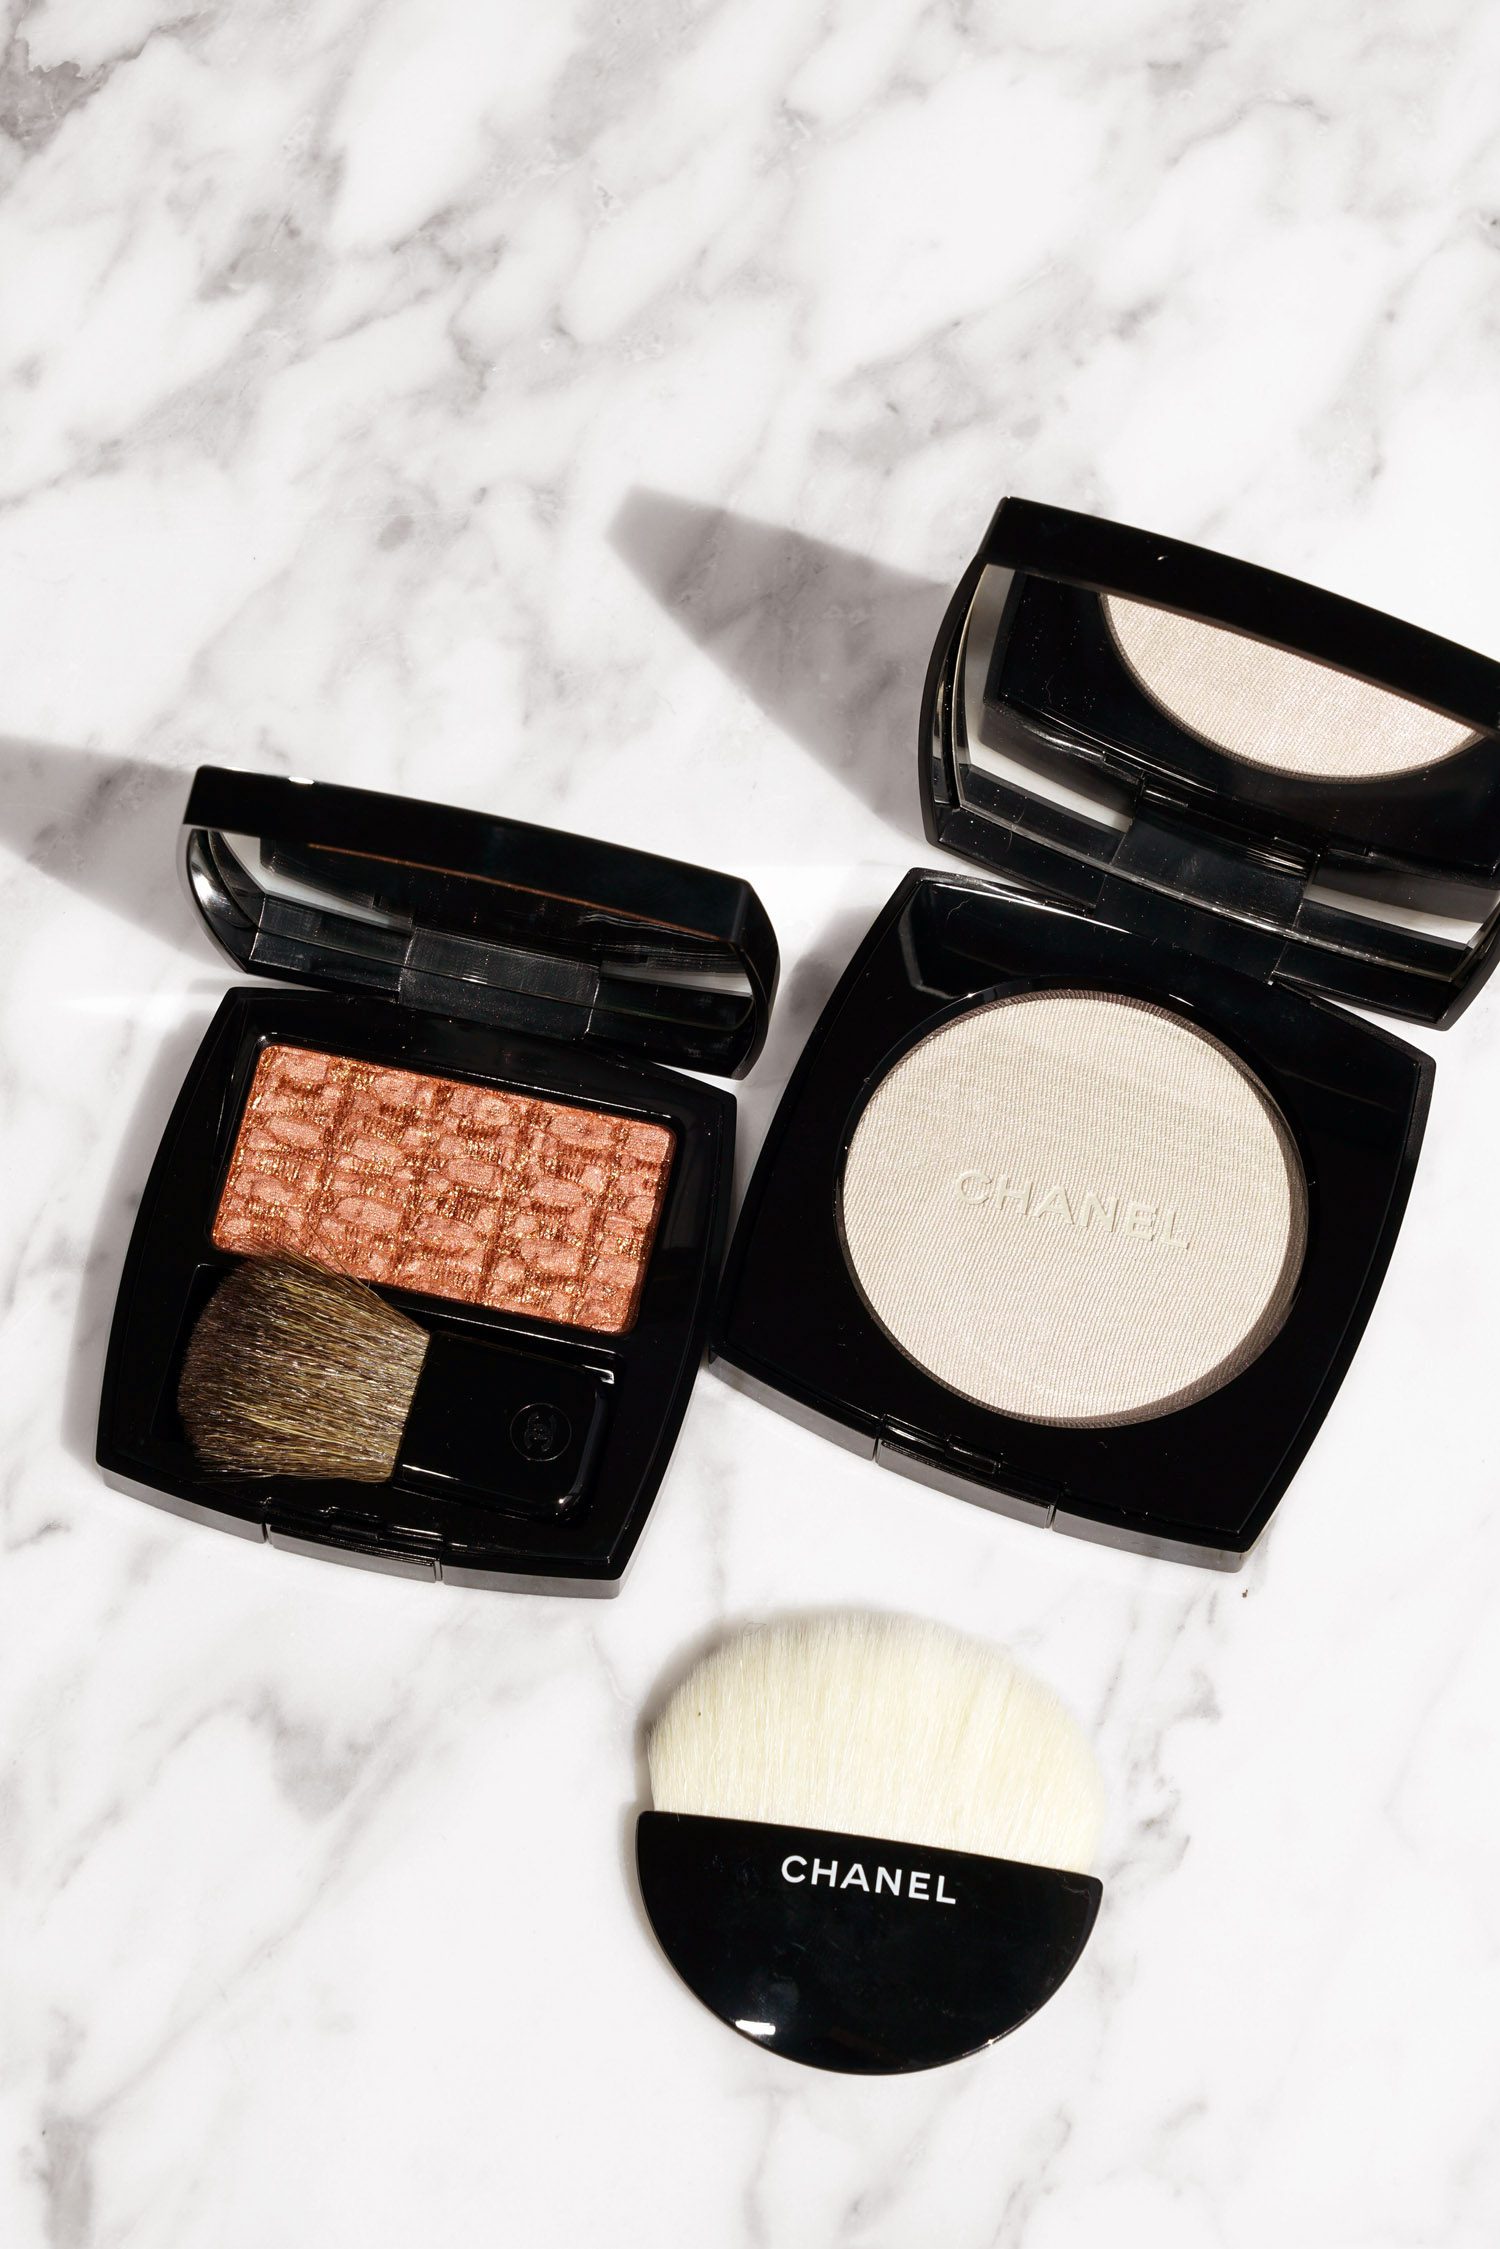 Chanel Pierres de Lumiere Collection Review + Swatches - The